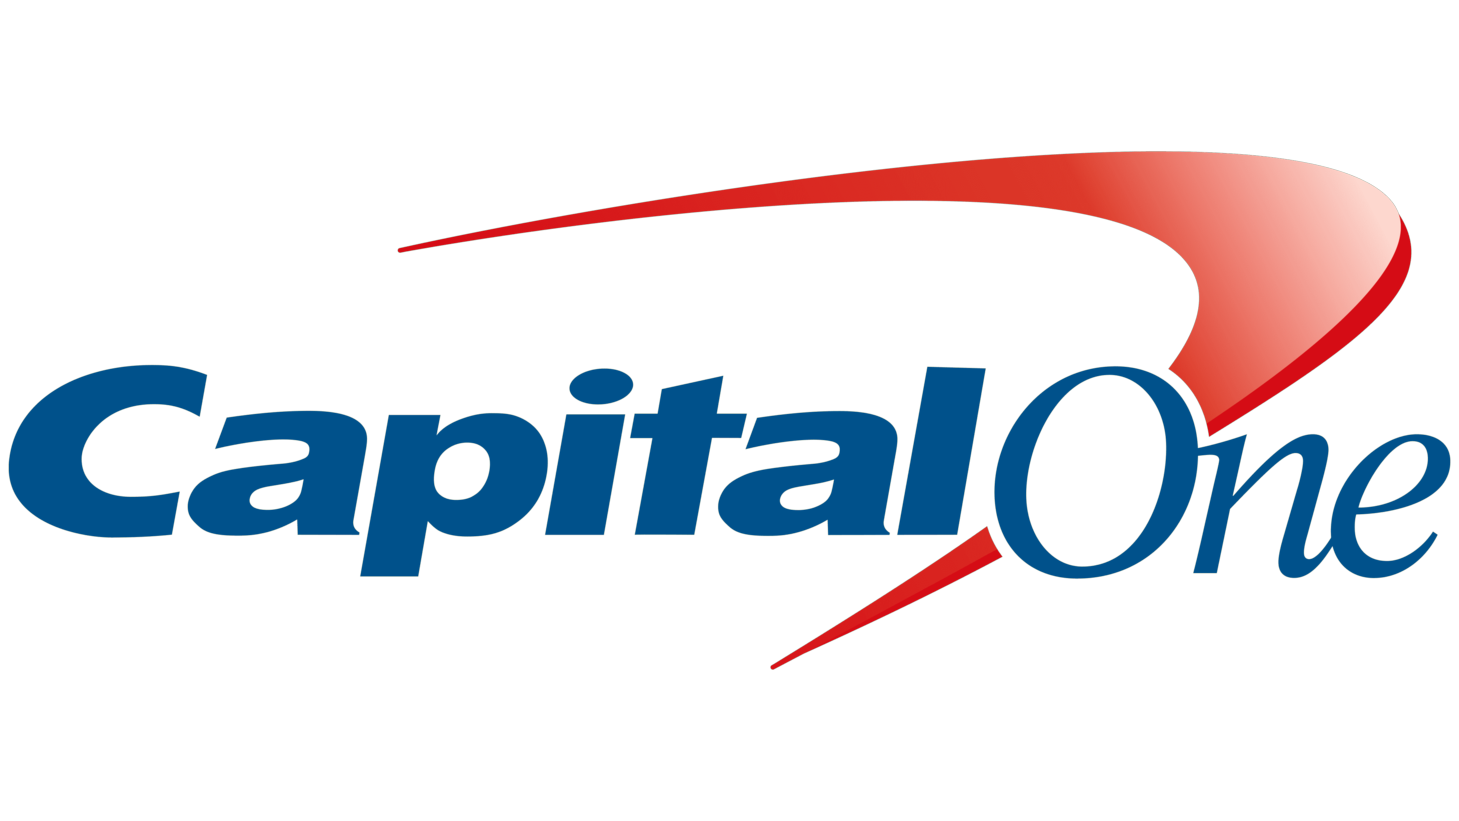 Capital one sign 2008 2016